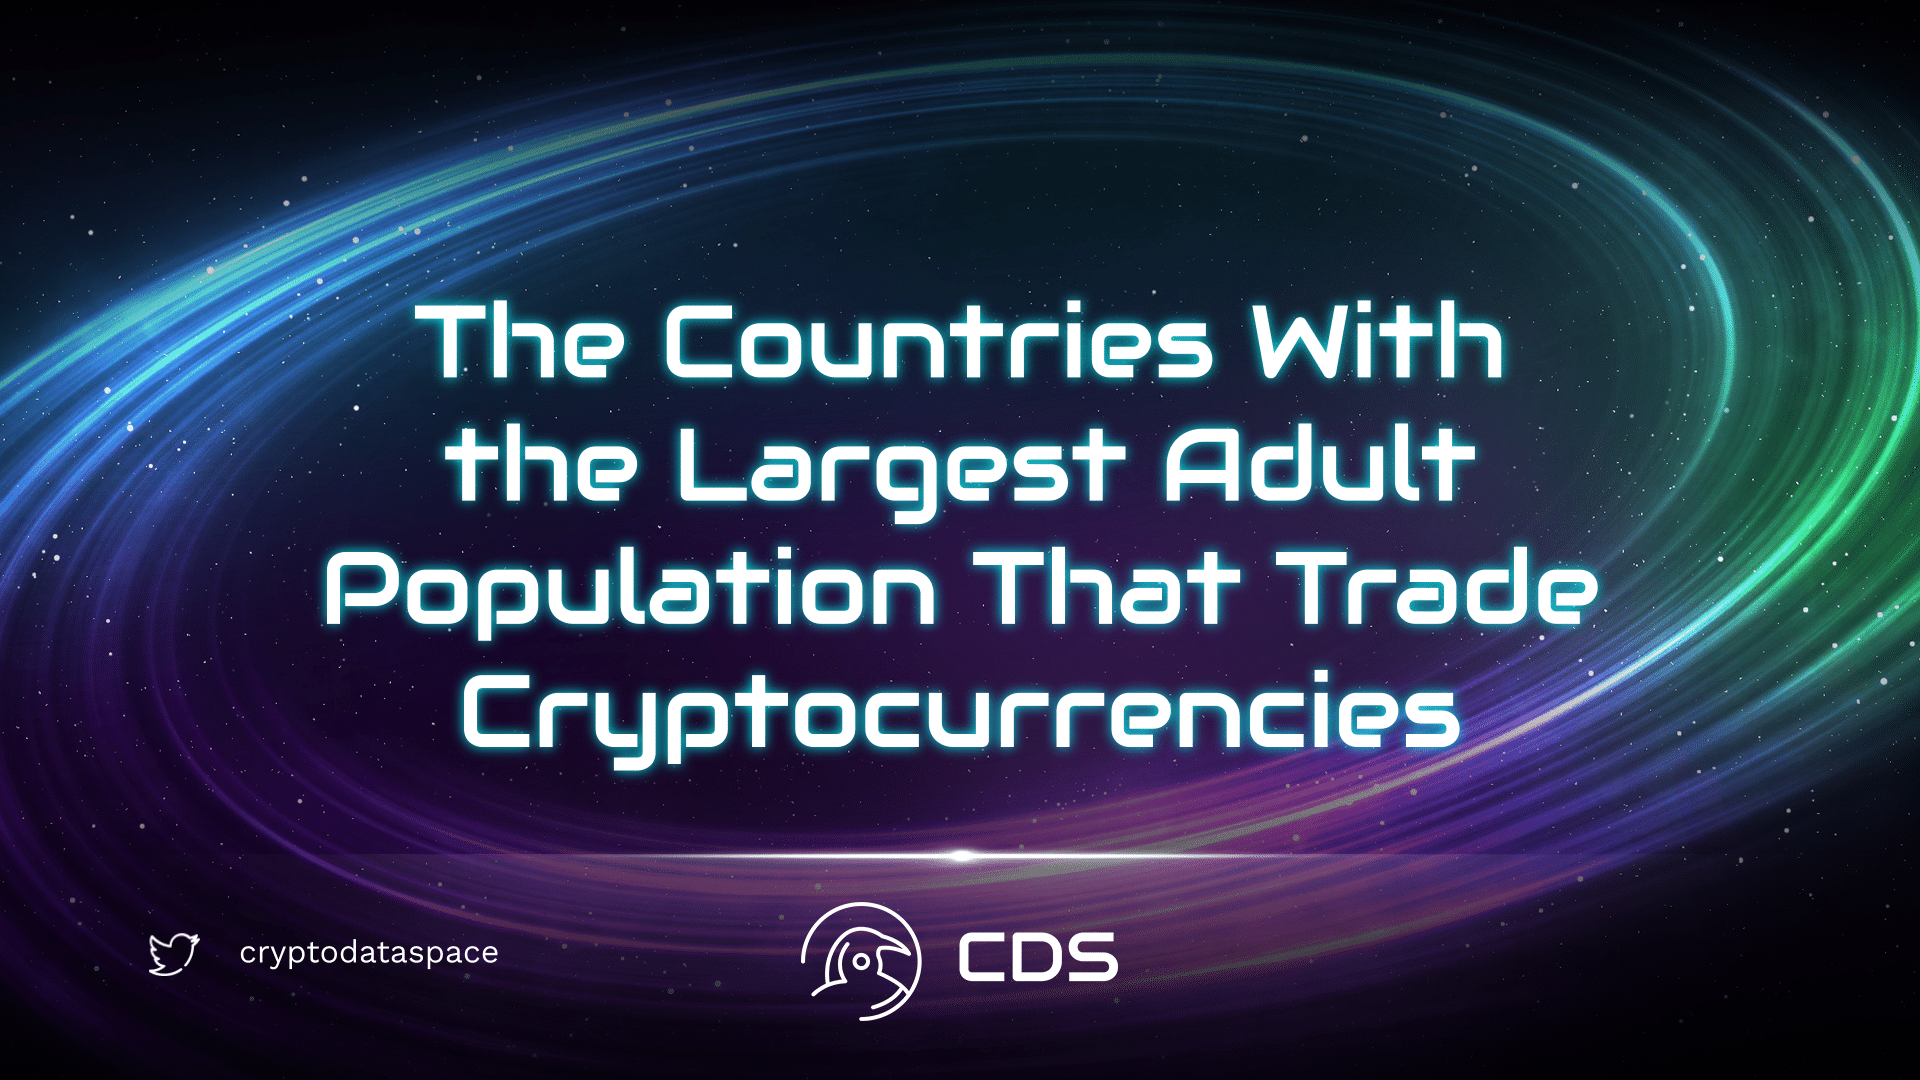 The Countries With the Largest Adult Population That Trade Cryptocurrencies